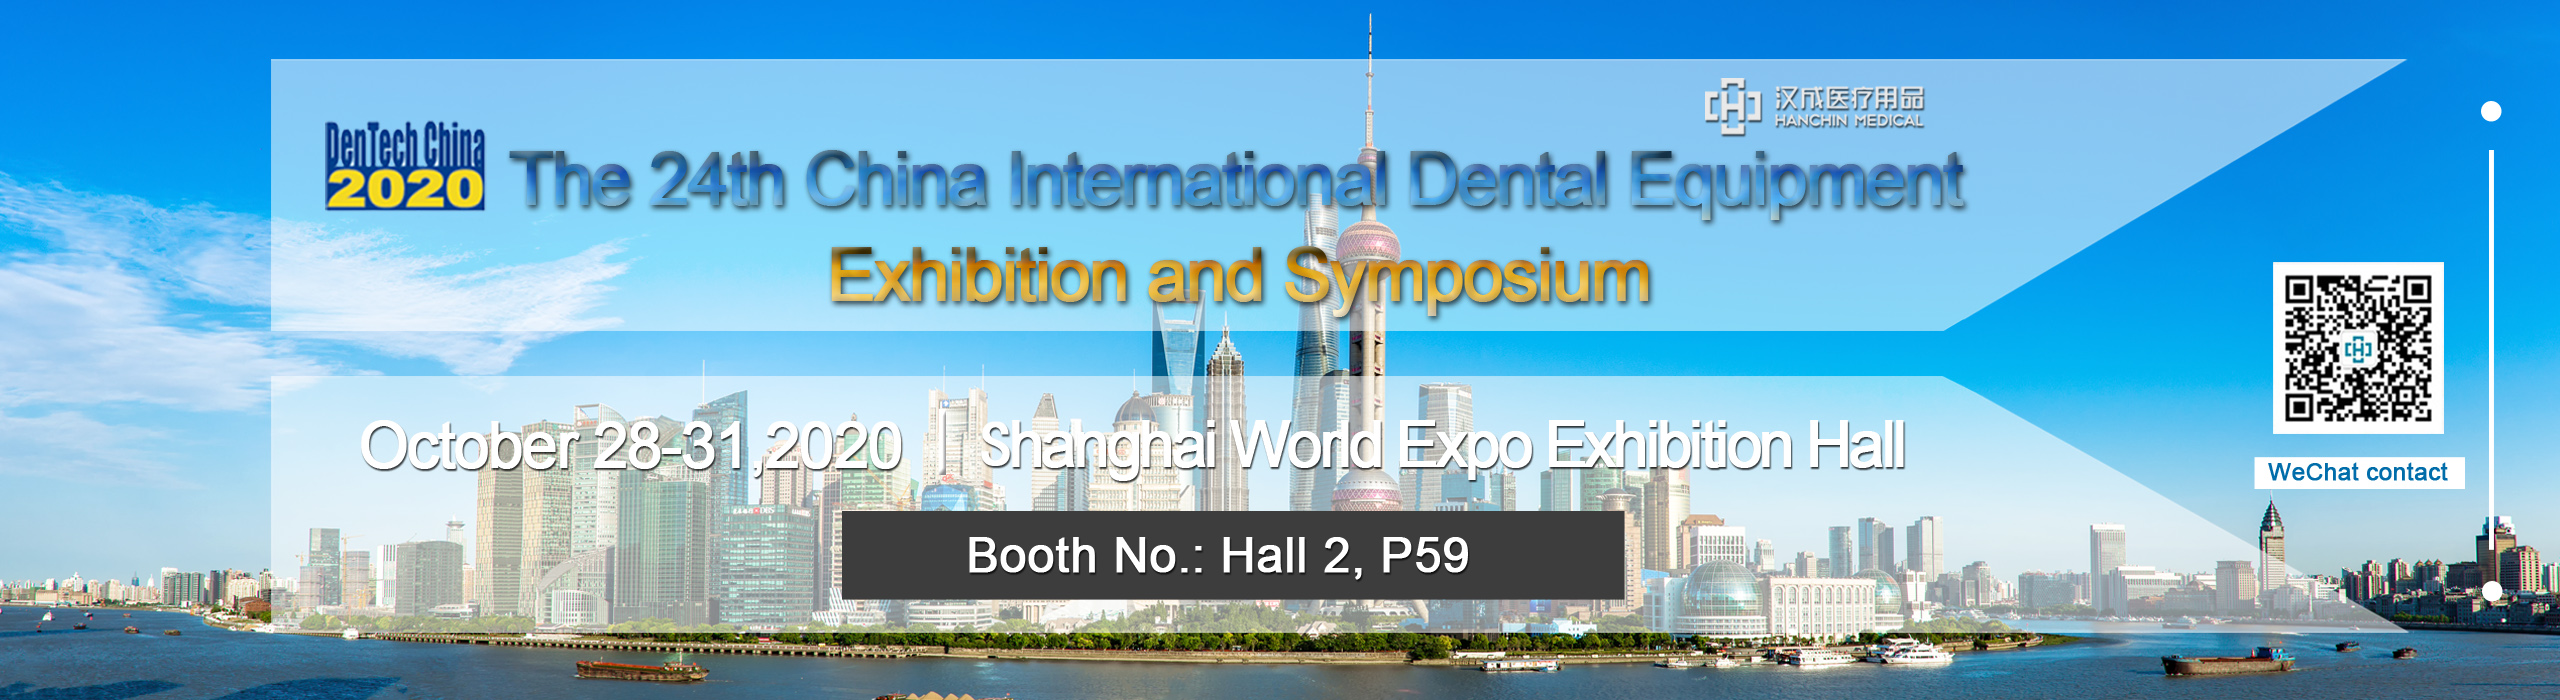 The 24th China International Exhibition & Symposium On Dental Equipment, Technology and Products